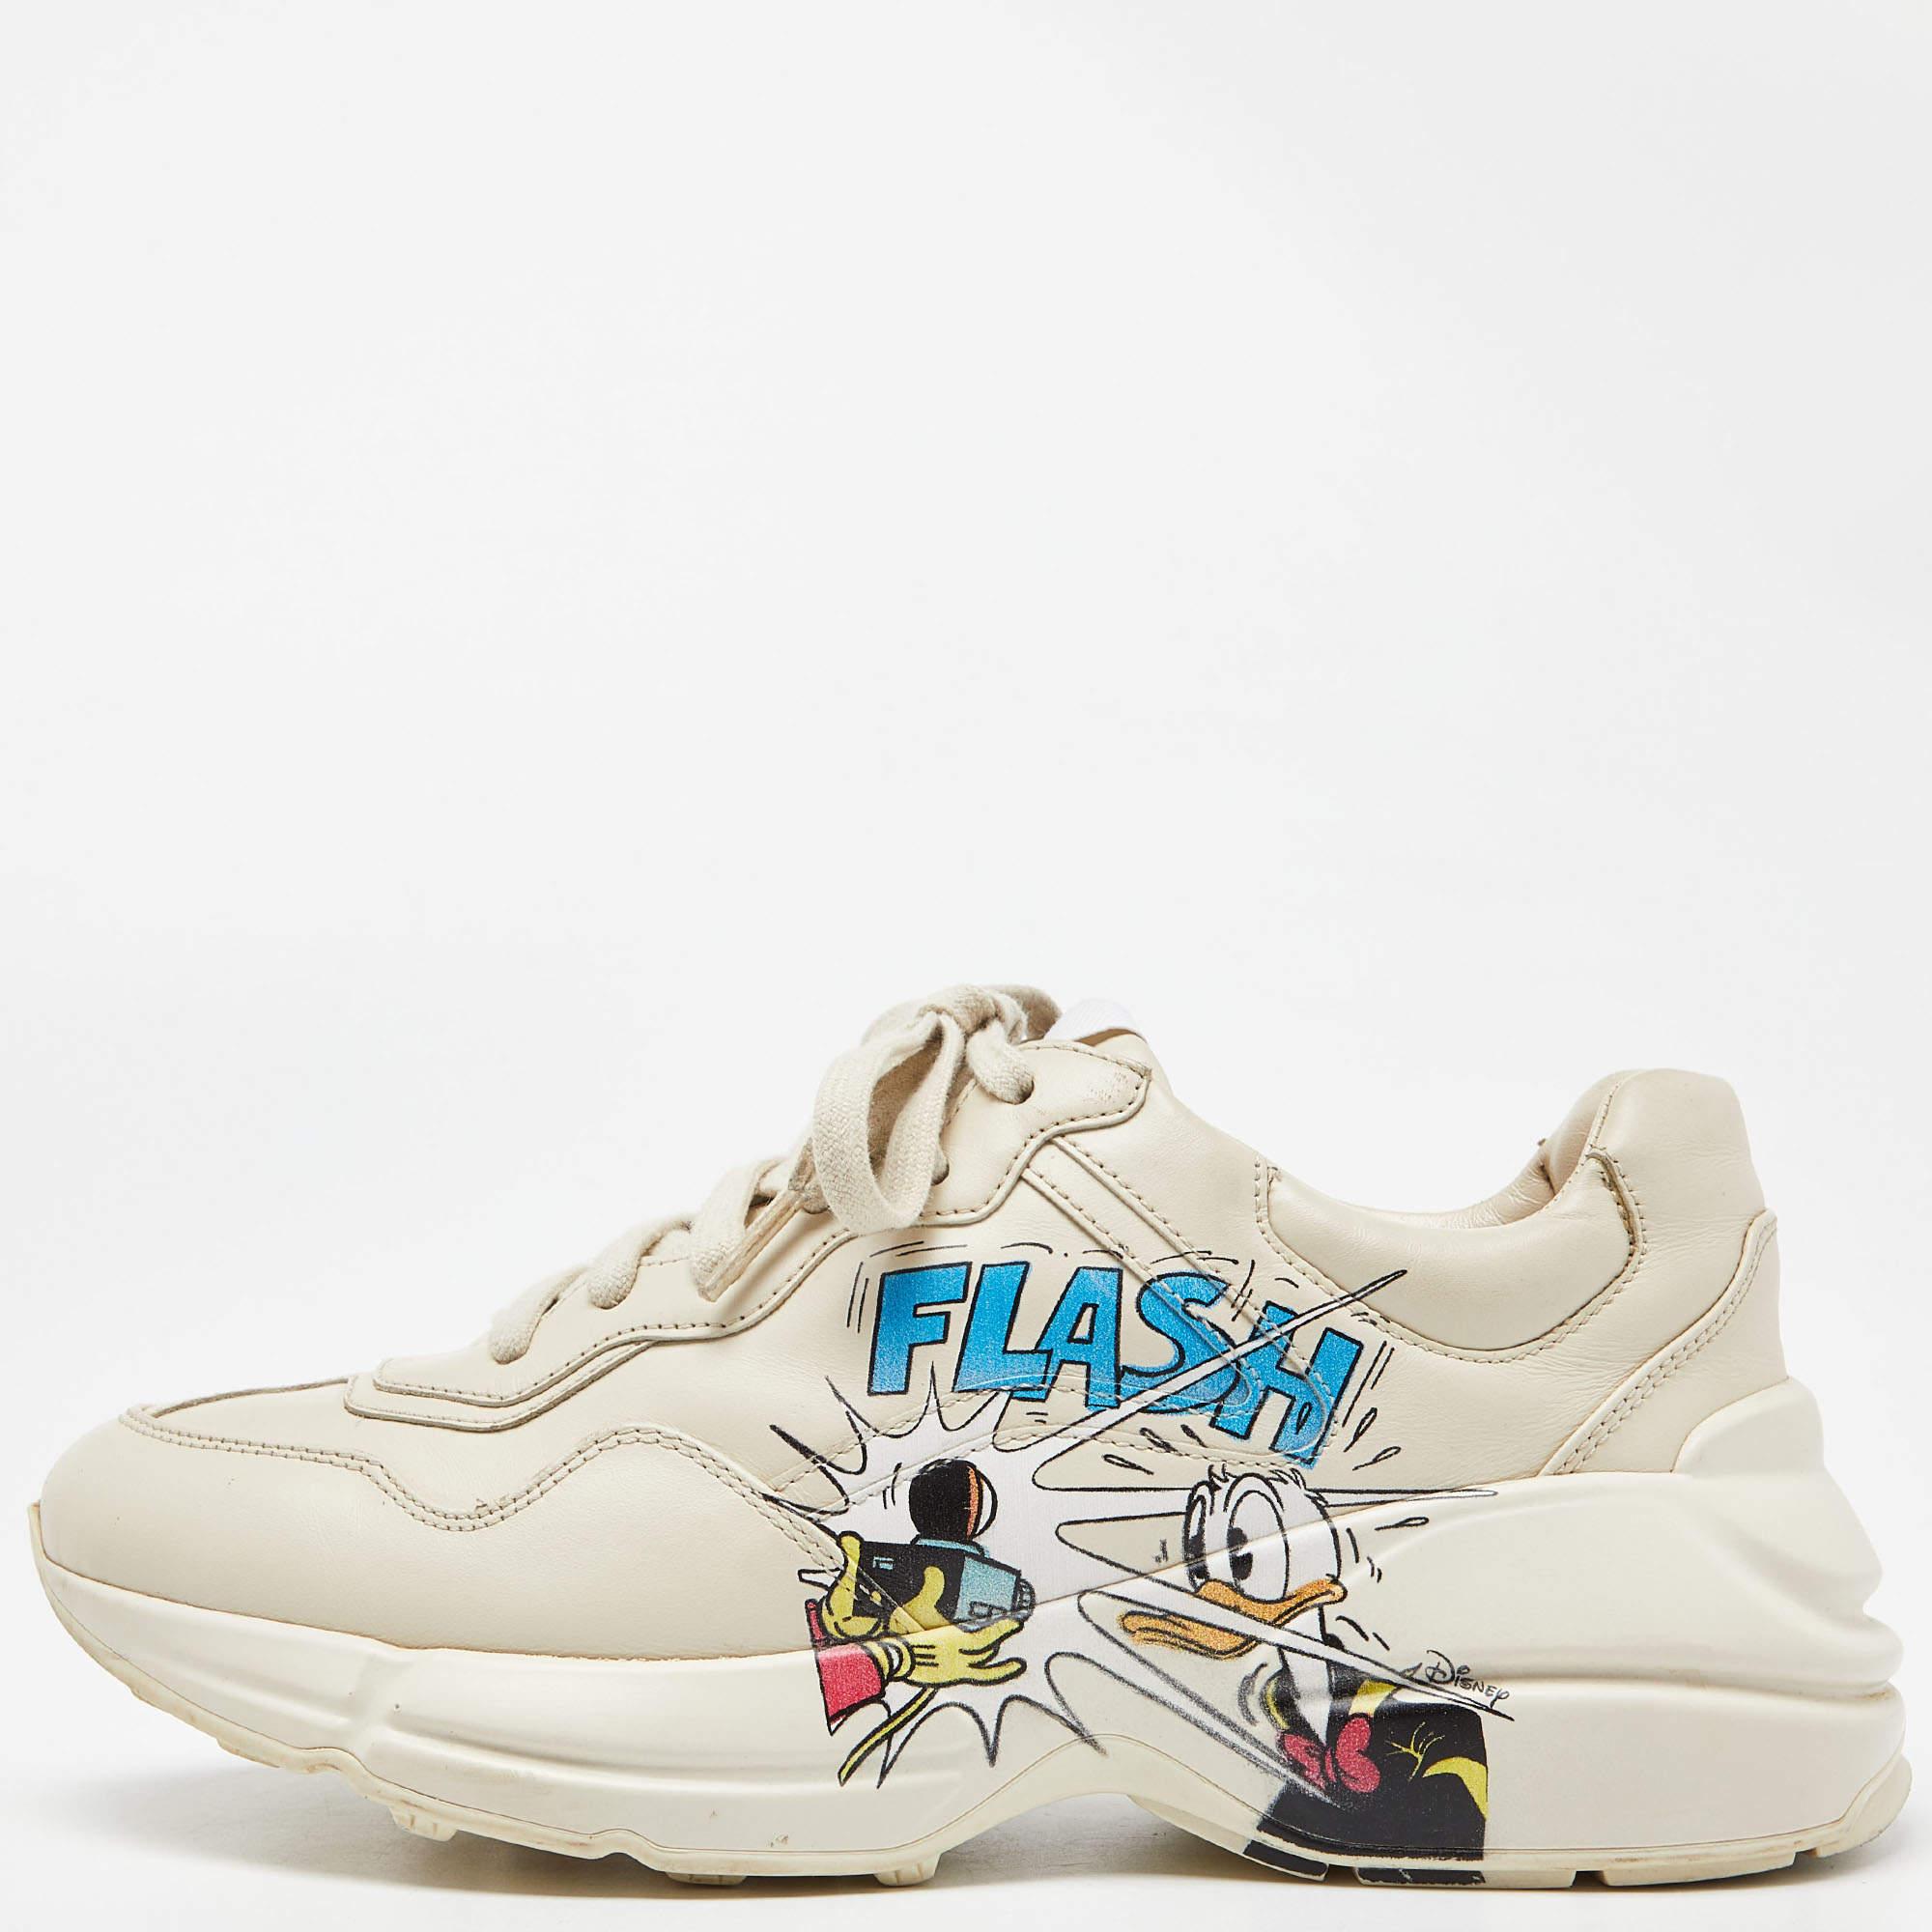 Gucci x Disney Donald Duck Cream Leather Rhyton Sneakers Size 38 For Sale 2